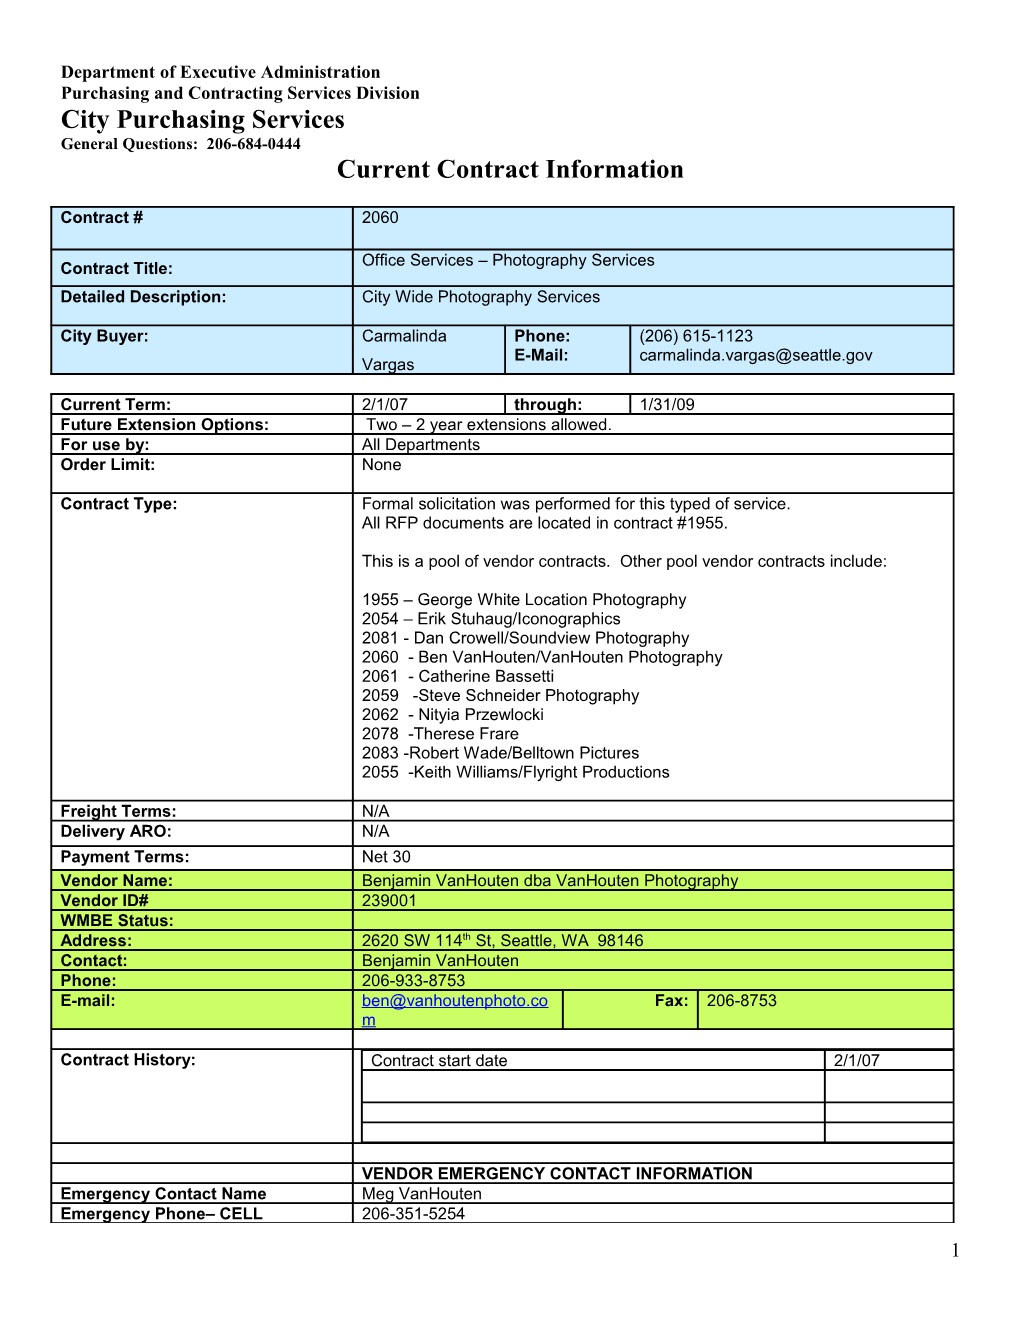 Current Contract Information Form s10